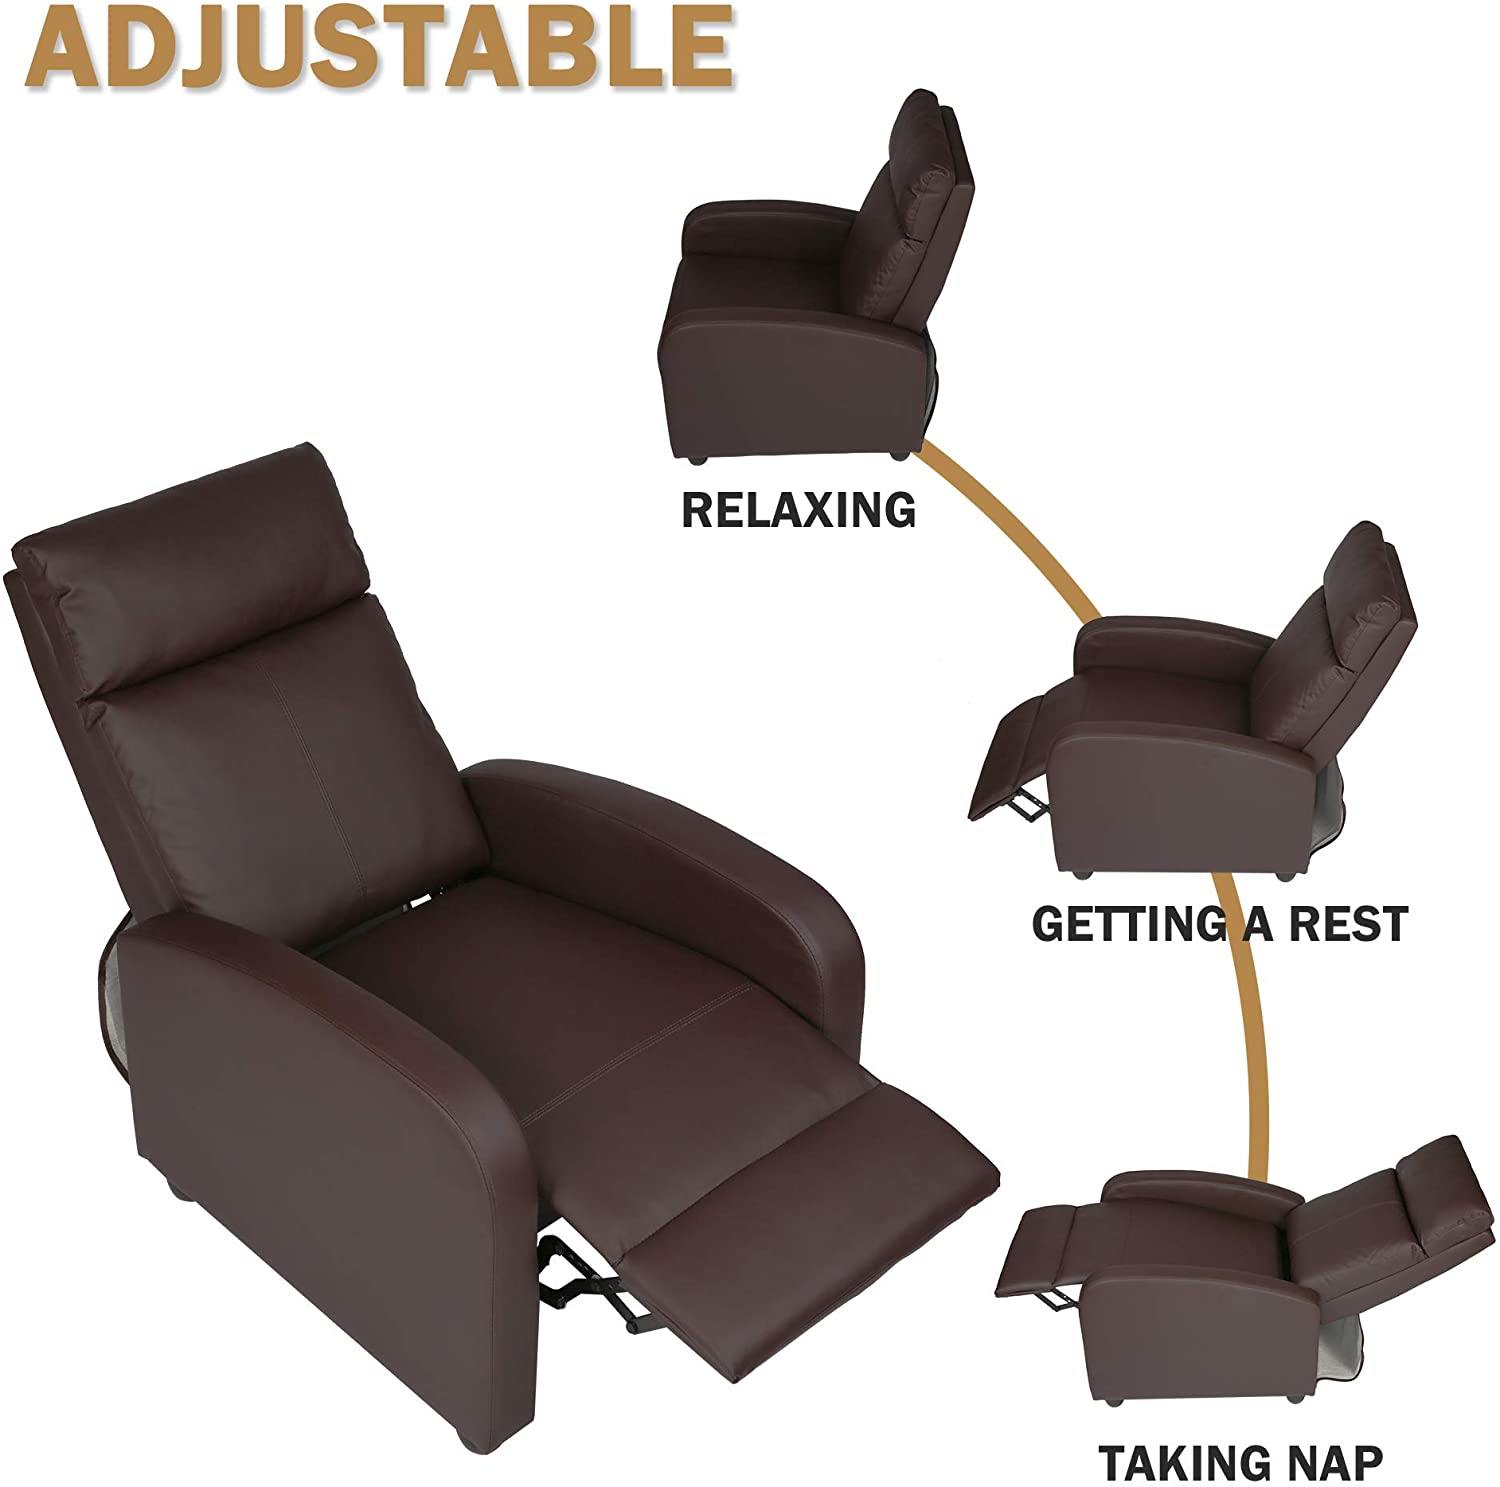 Recliner Chair PU Leather Single Sofa Adjustable Home Theater Seating Recliner Sofa for Living Room & Bedroom, Brown - Bosonshop